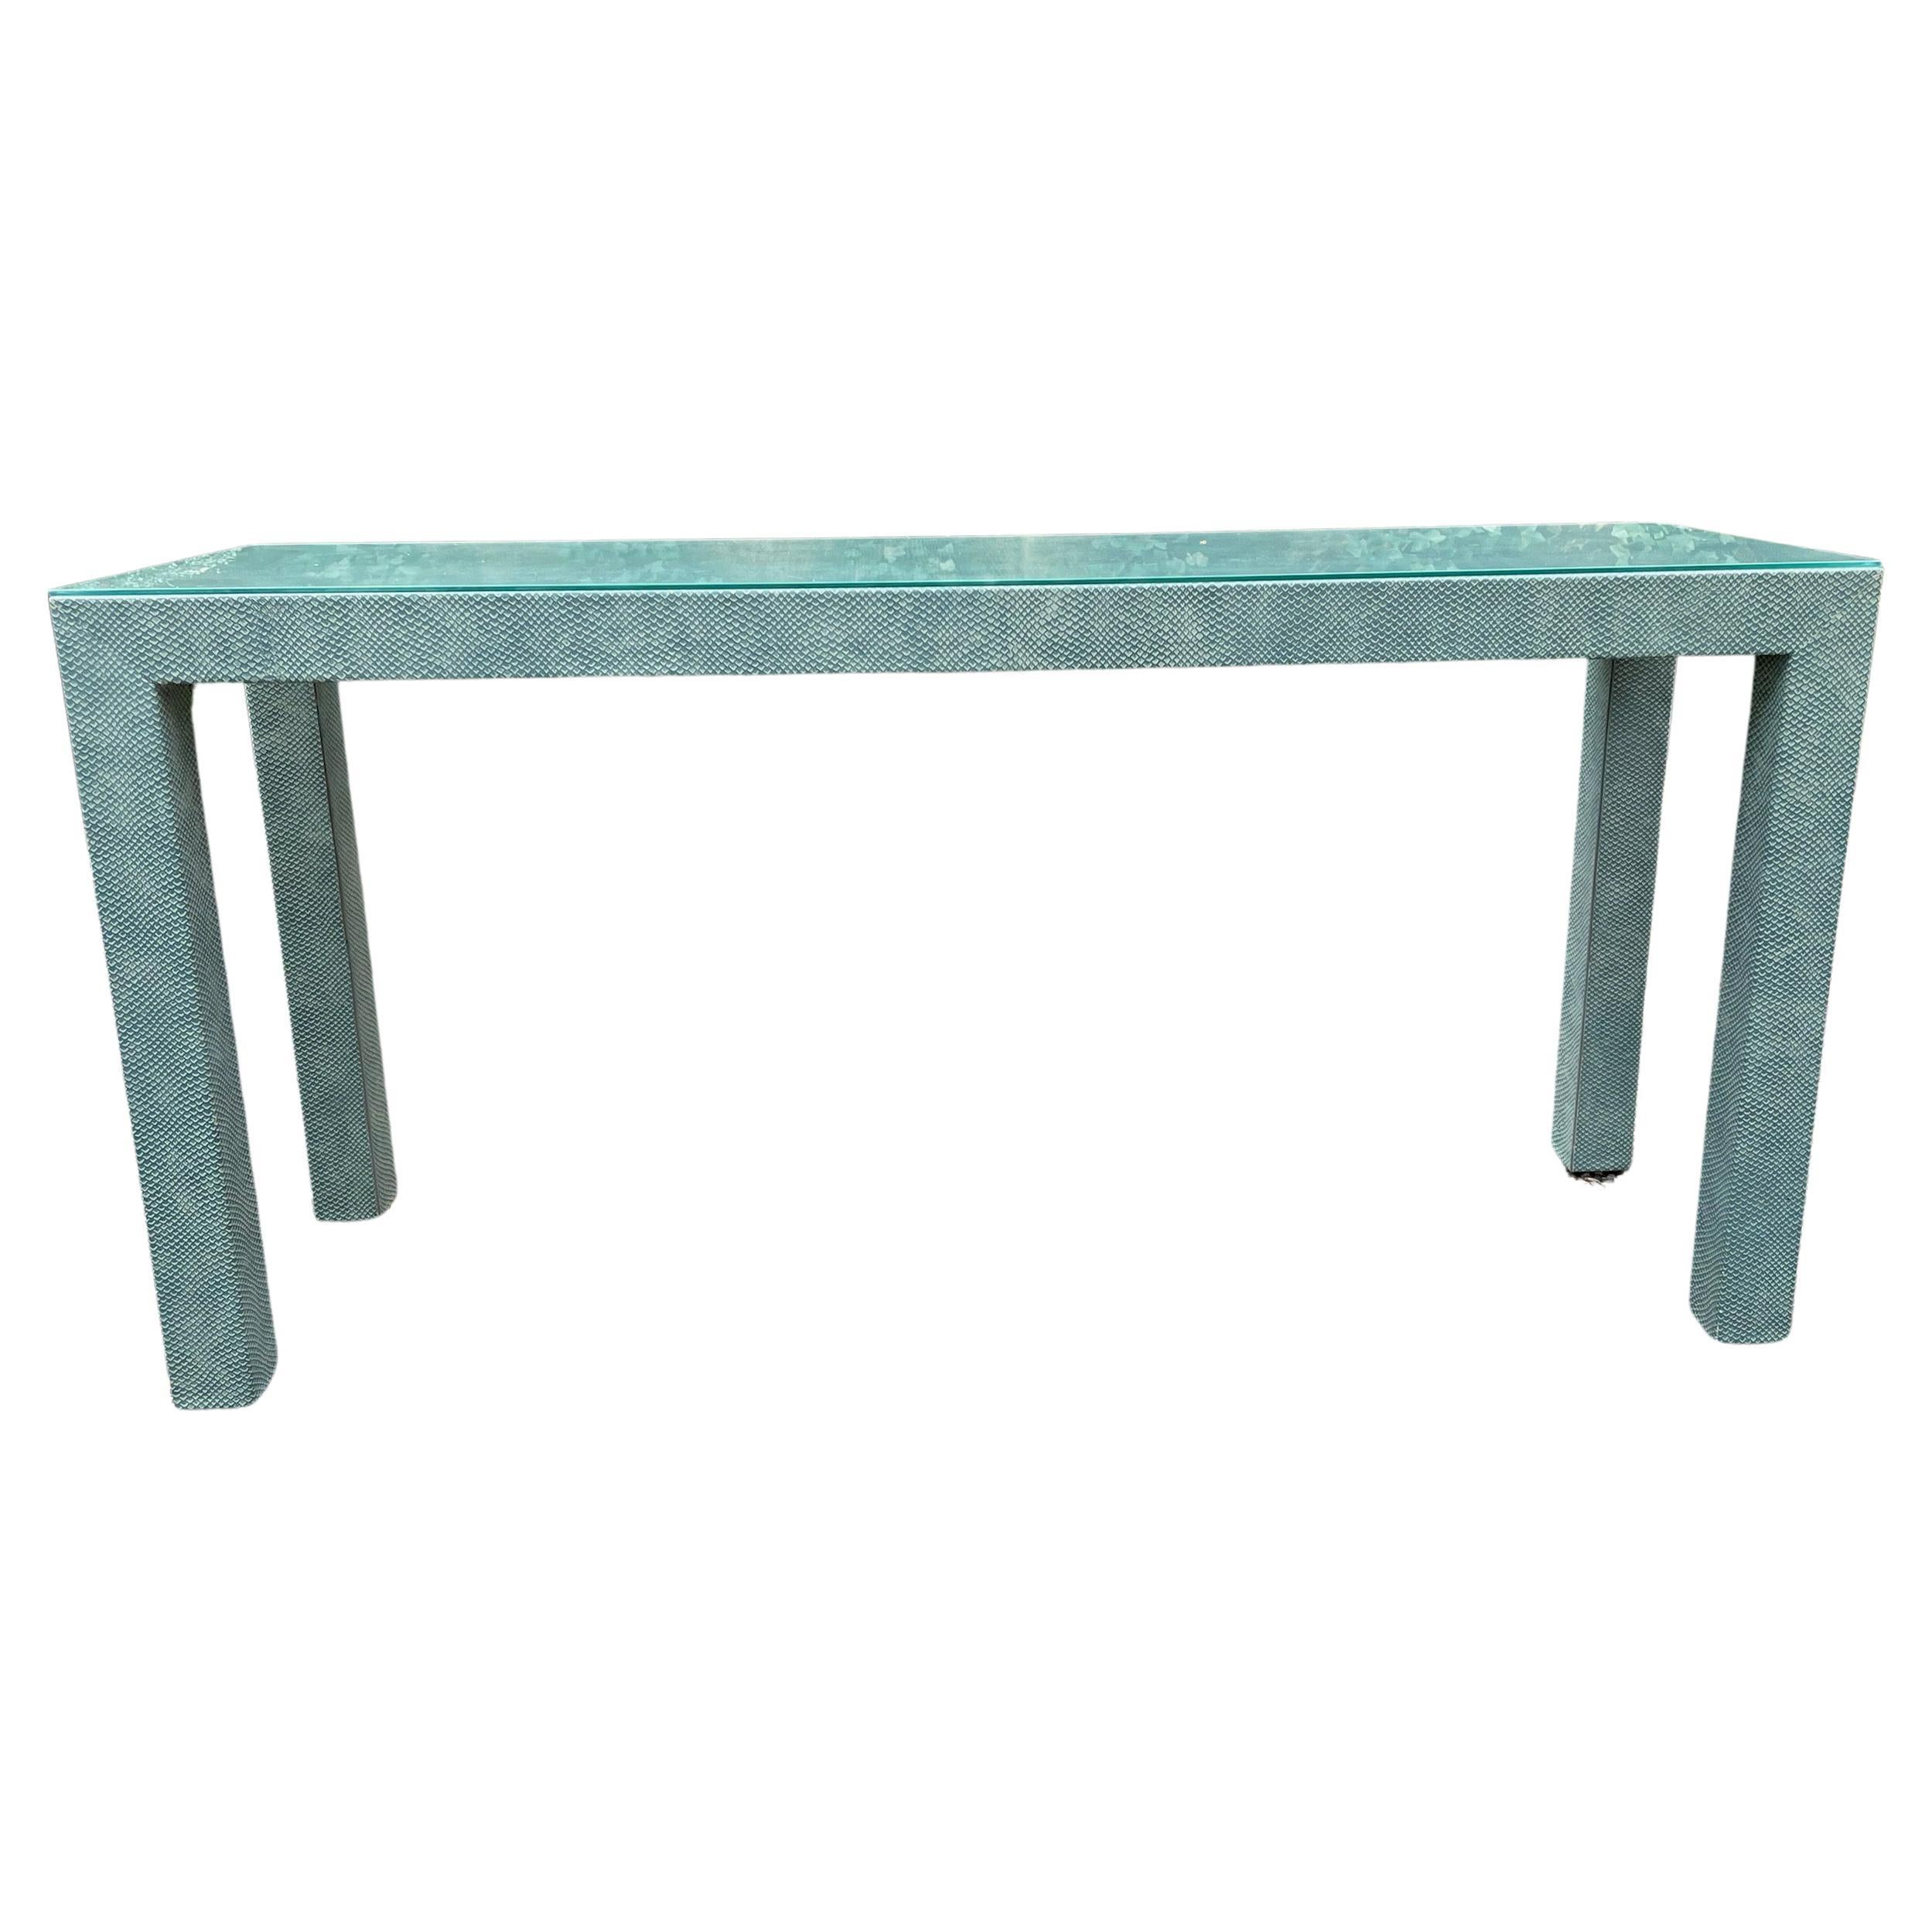 Stunning Edelman Blue Green Leather Wrapped Parsons Style Console Table